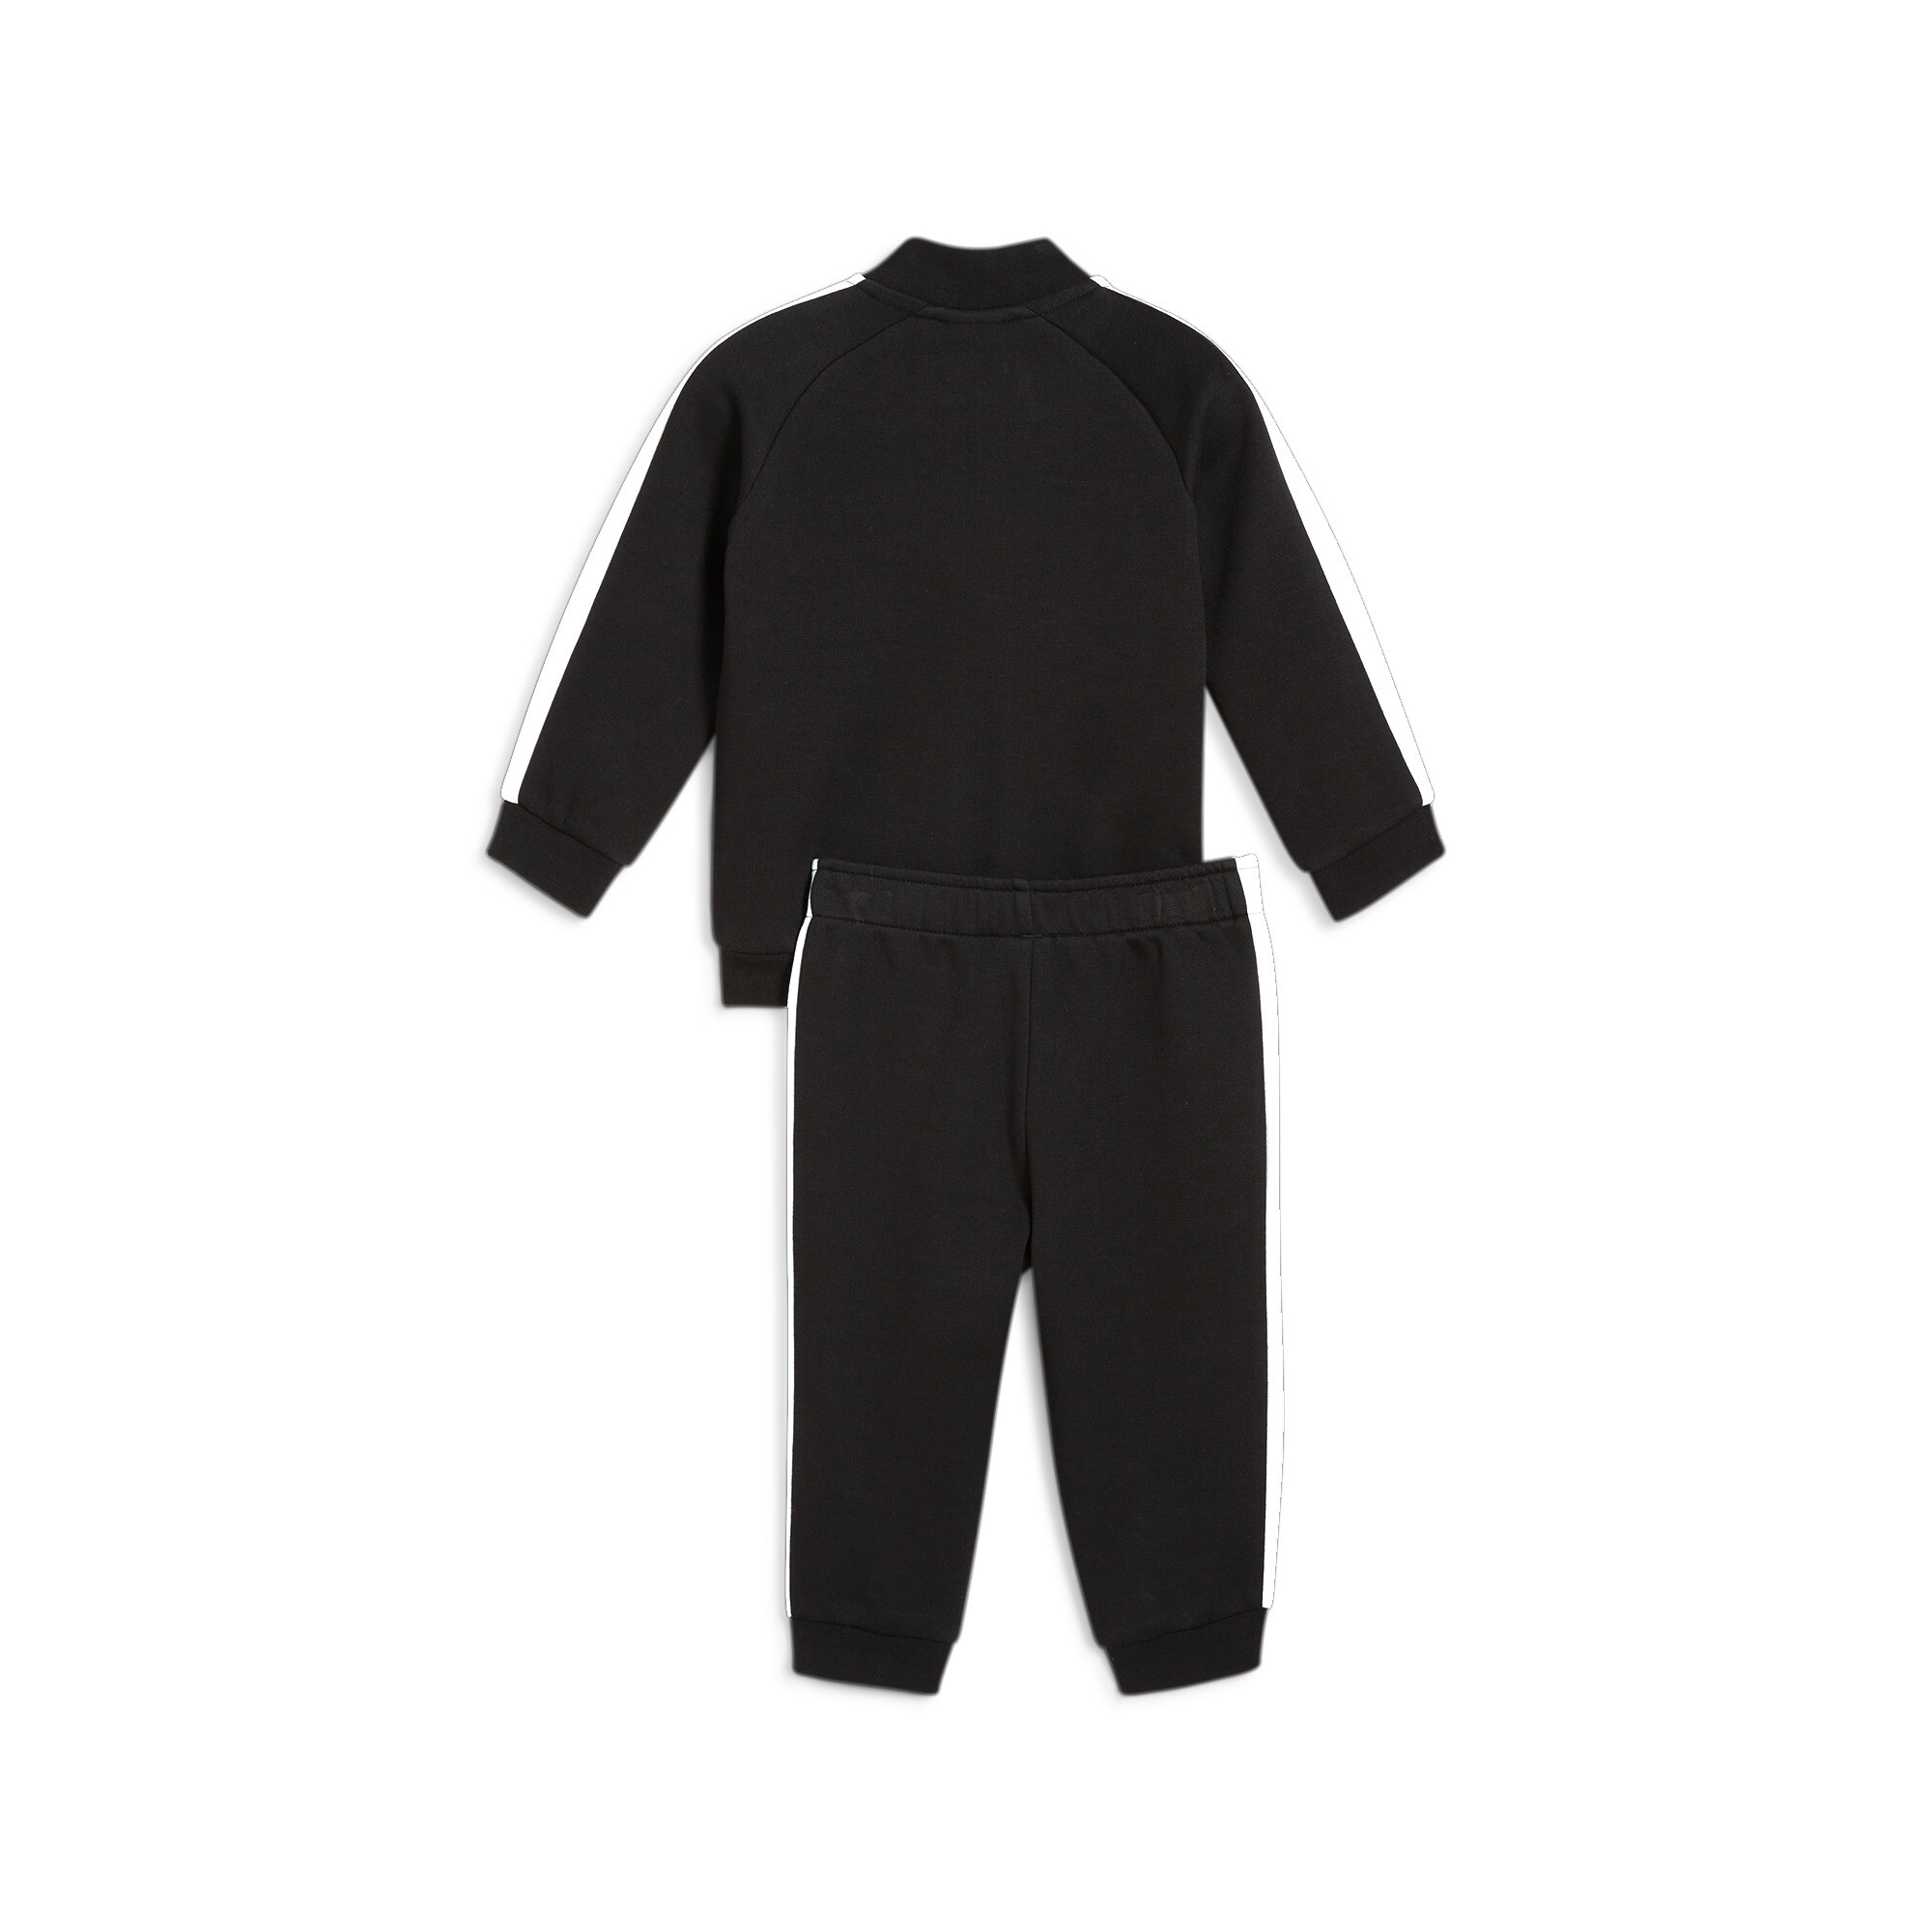 Kids' PUMA MINICATS T7 ICONIC Baby Tracksuit Set In Black, Size 4-6 Months